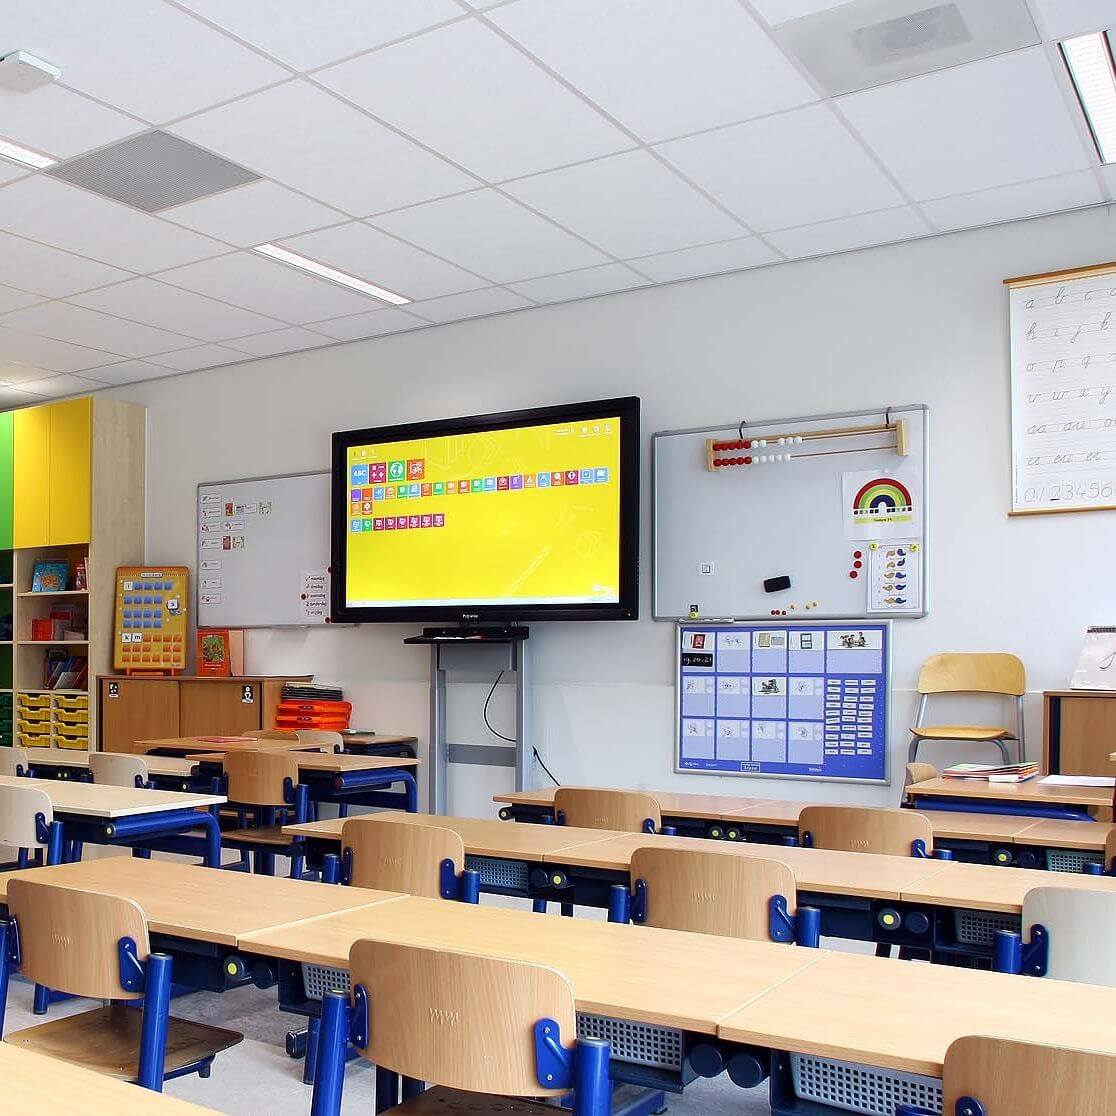 Schools<em>Learn and perform better with AMMANU lighting solutions</em>